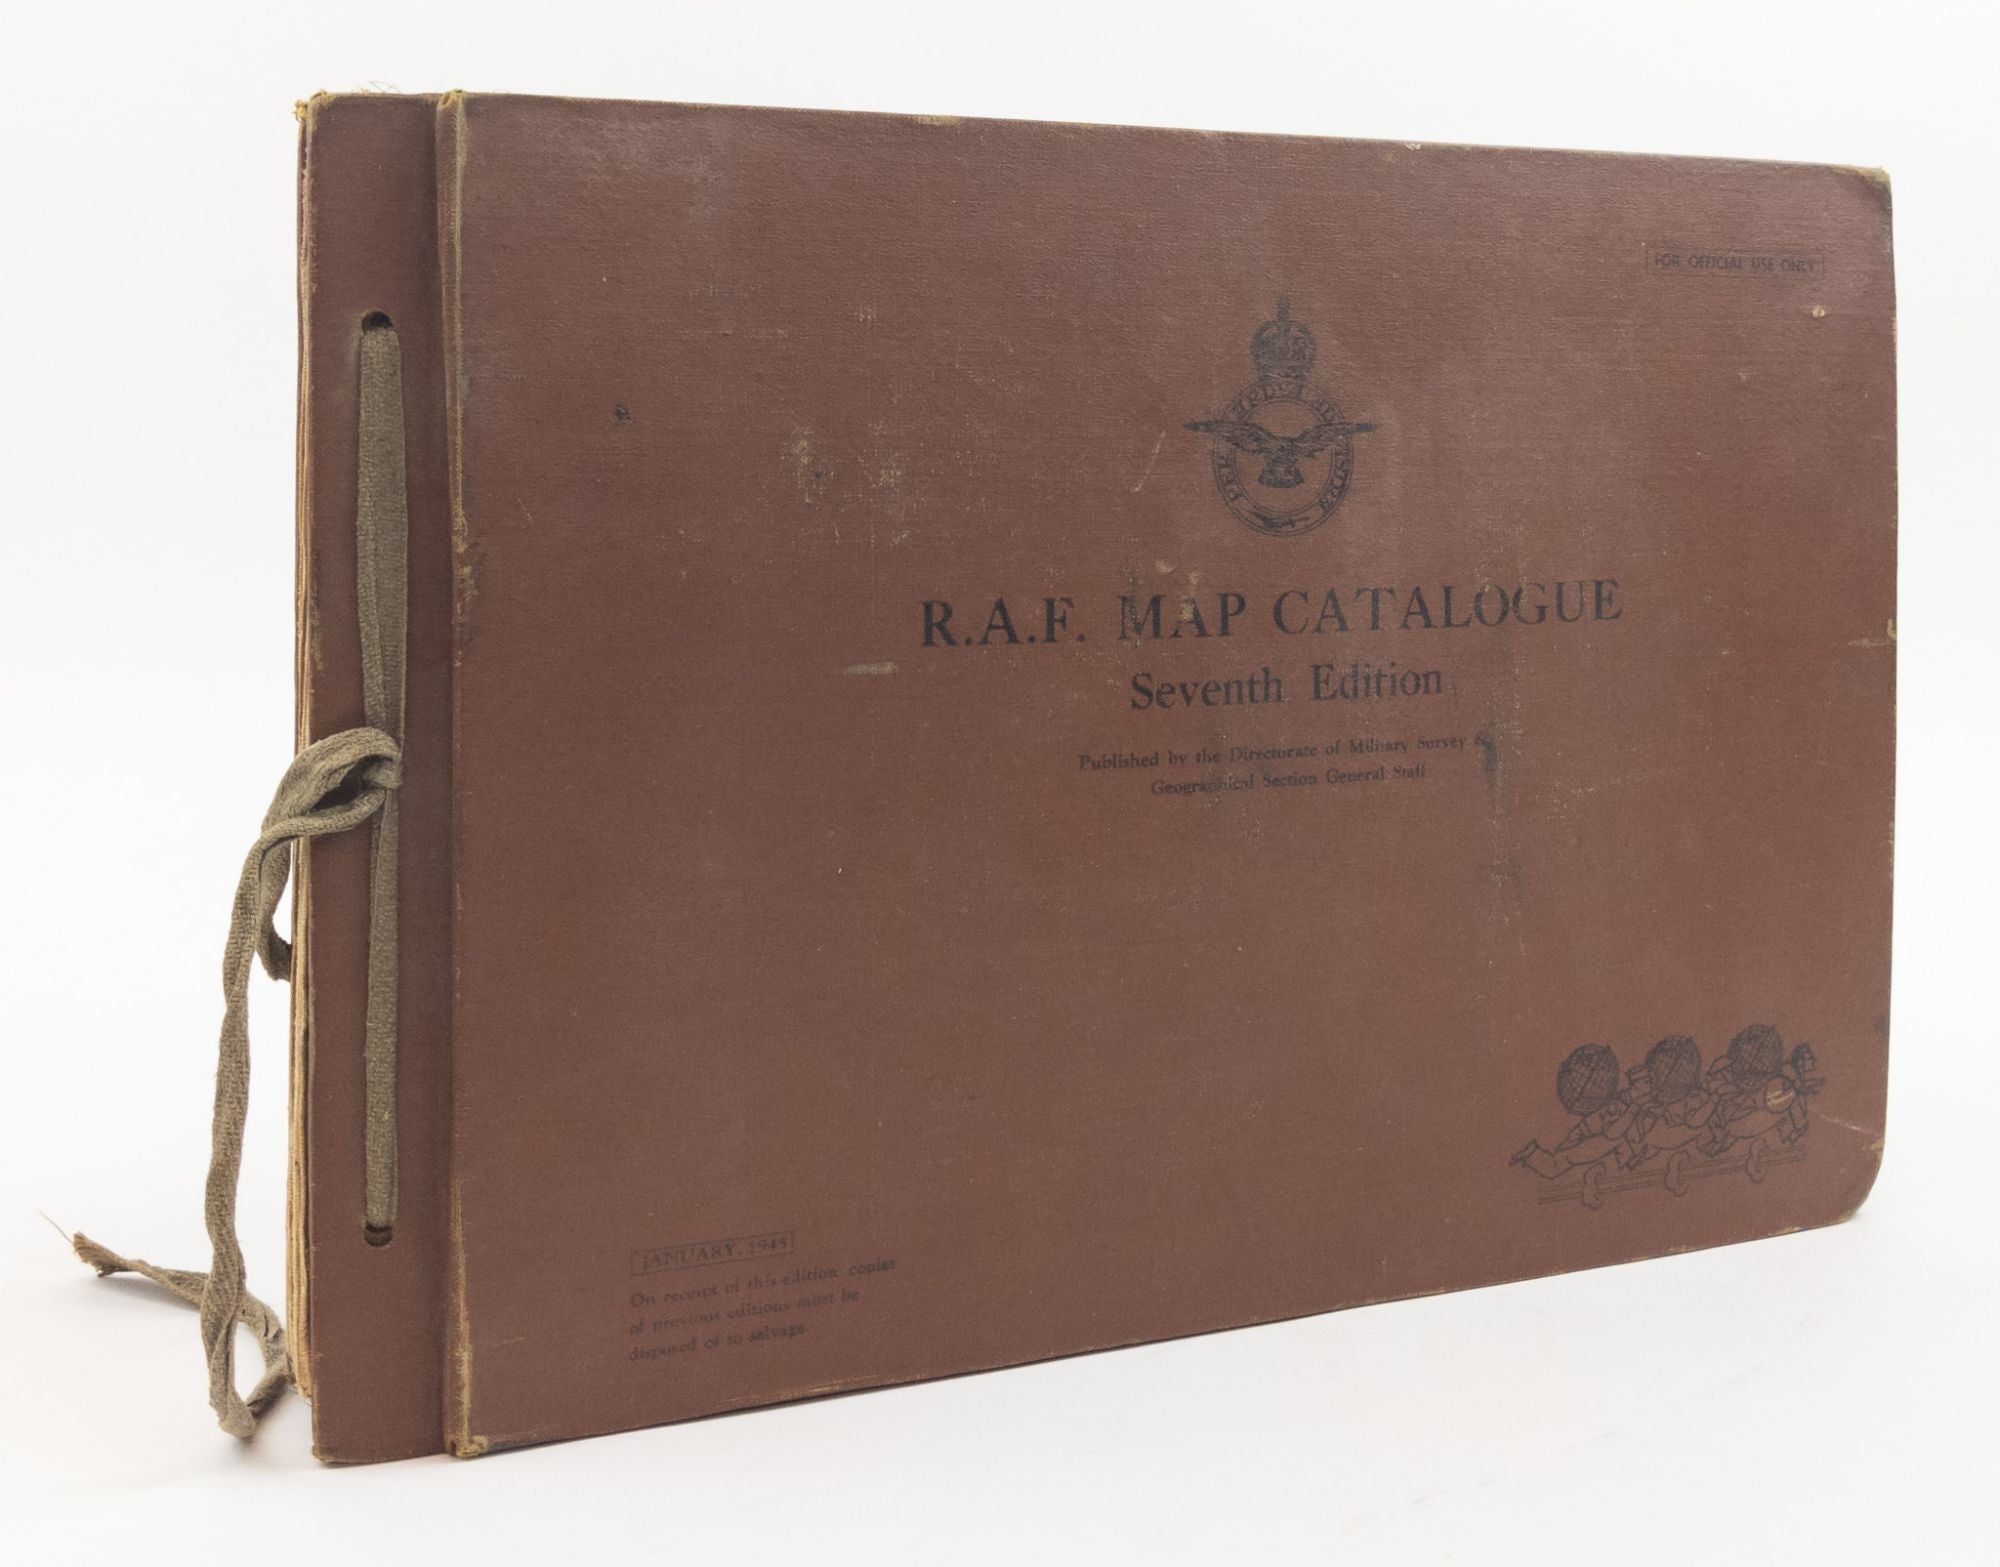 Product Image for R.A.F. MAP CATALOGUE